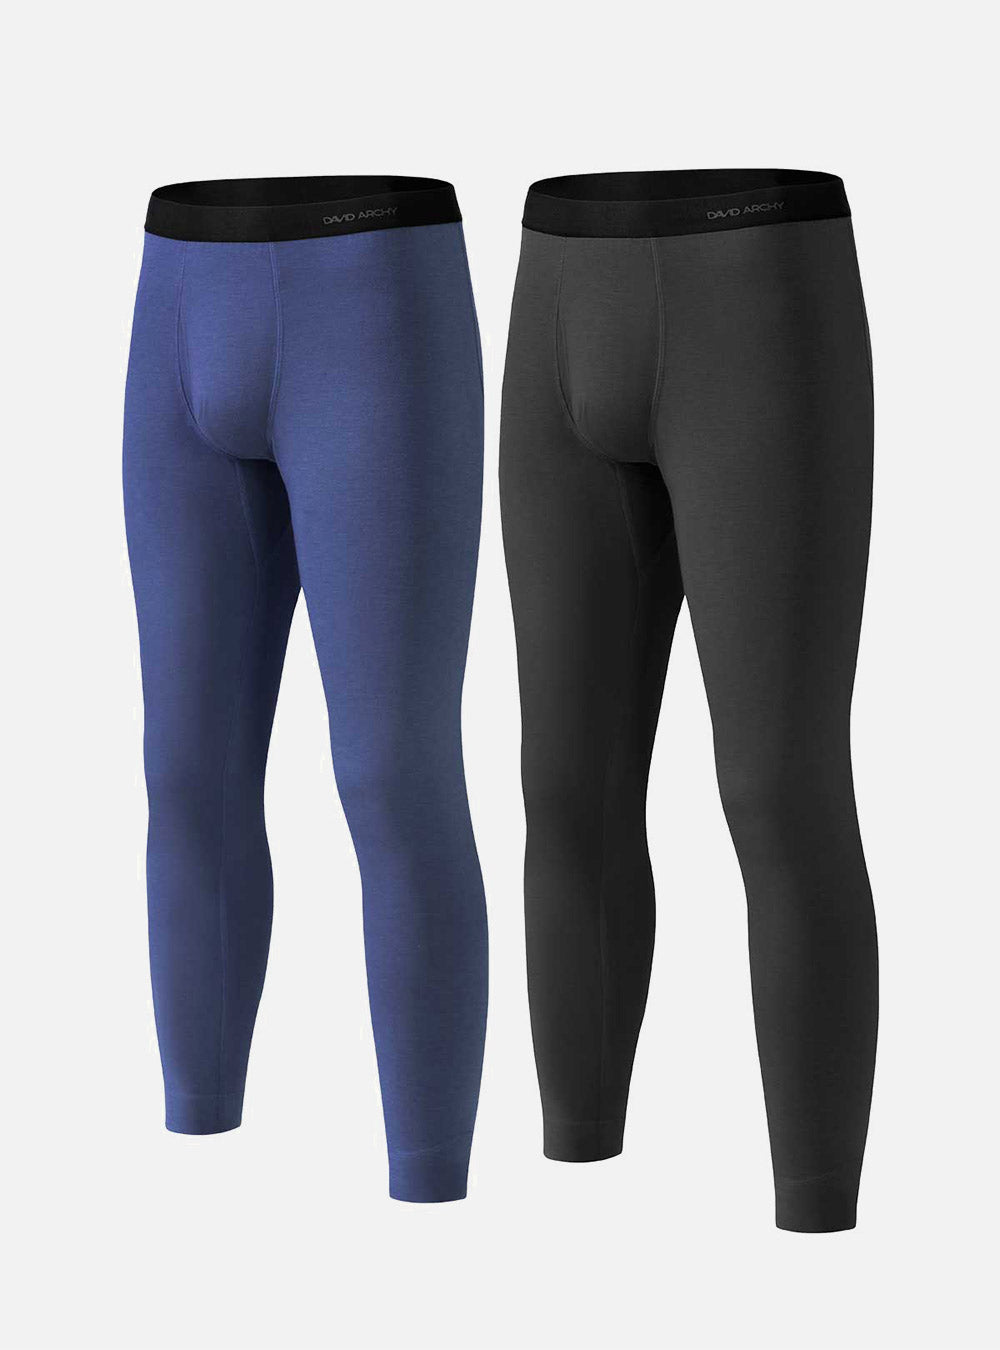 Unisex Inner Fleeces Thermal Underwear Set Warm Thermal Top Thermal Trouser  Leggings Thermoactive Thermal Base Layer For Winter